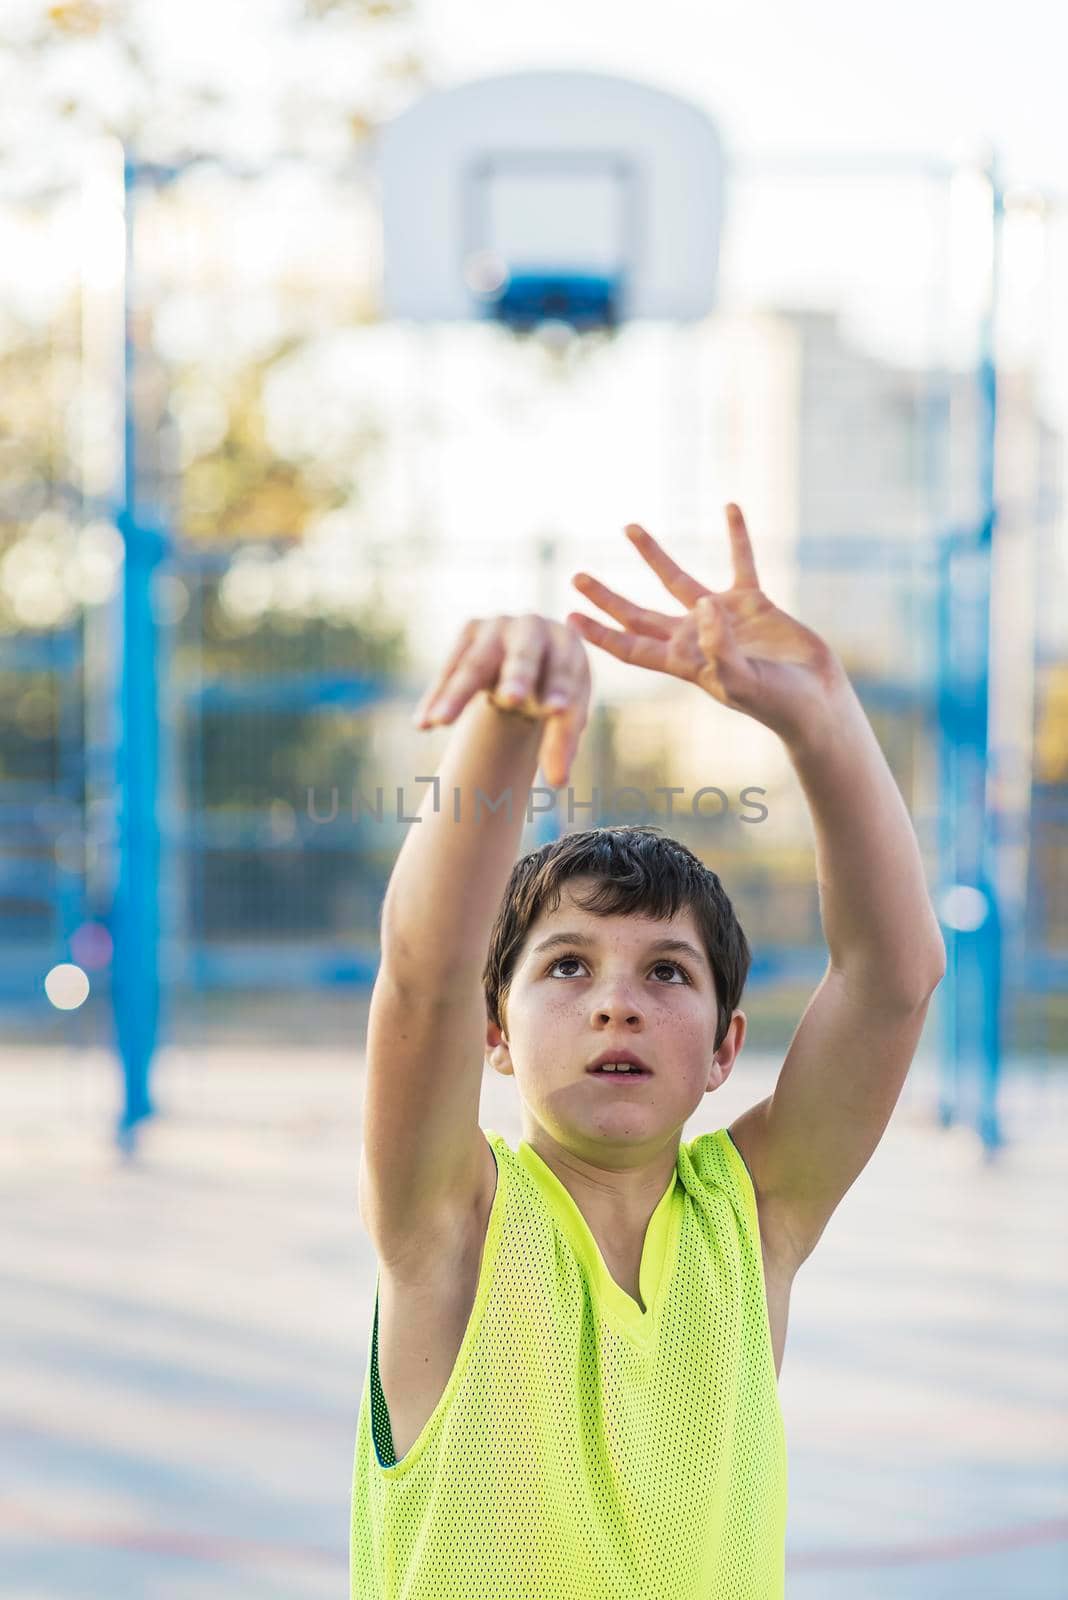 A Teenage playing basketball on an outdoors court